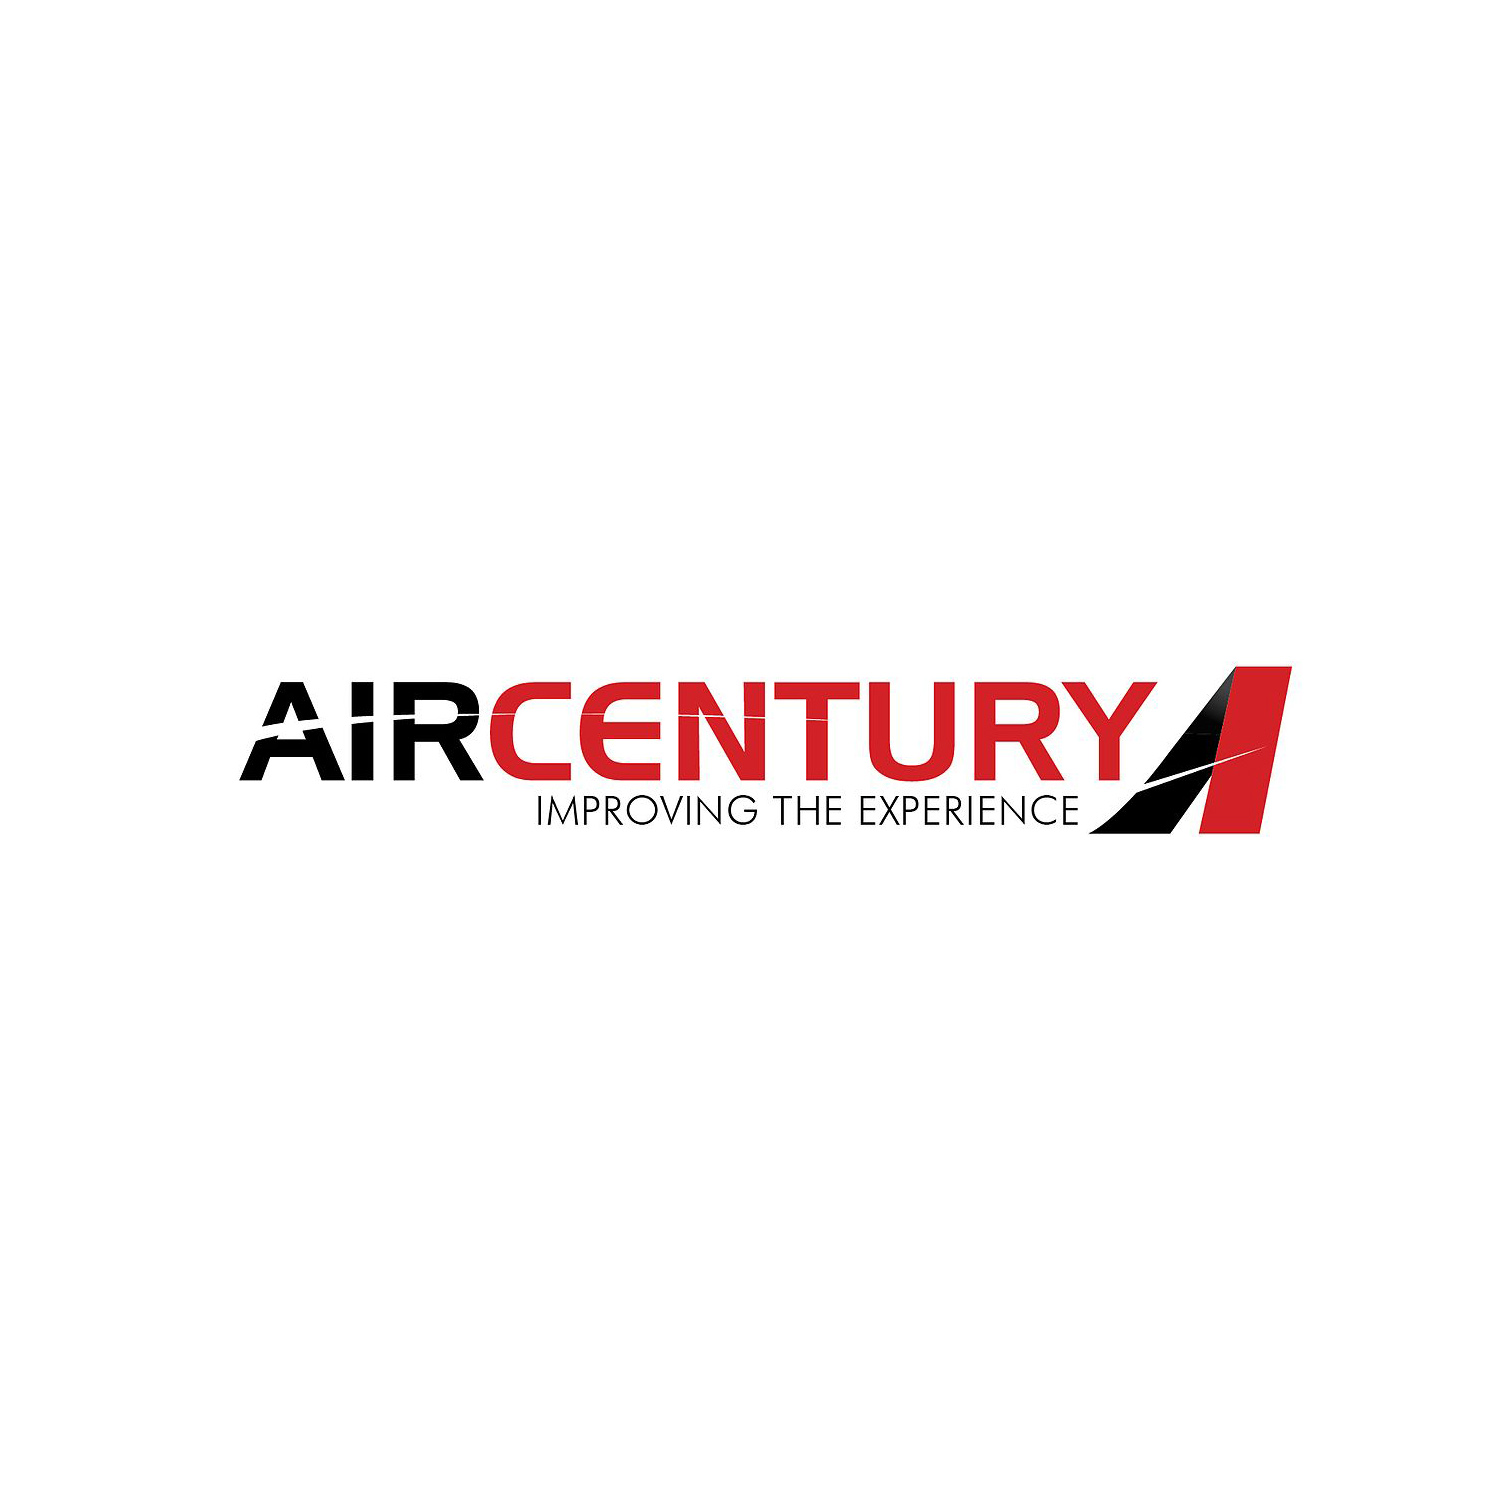 Air Century implements CHAMP’s TRAXON Global Security solution